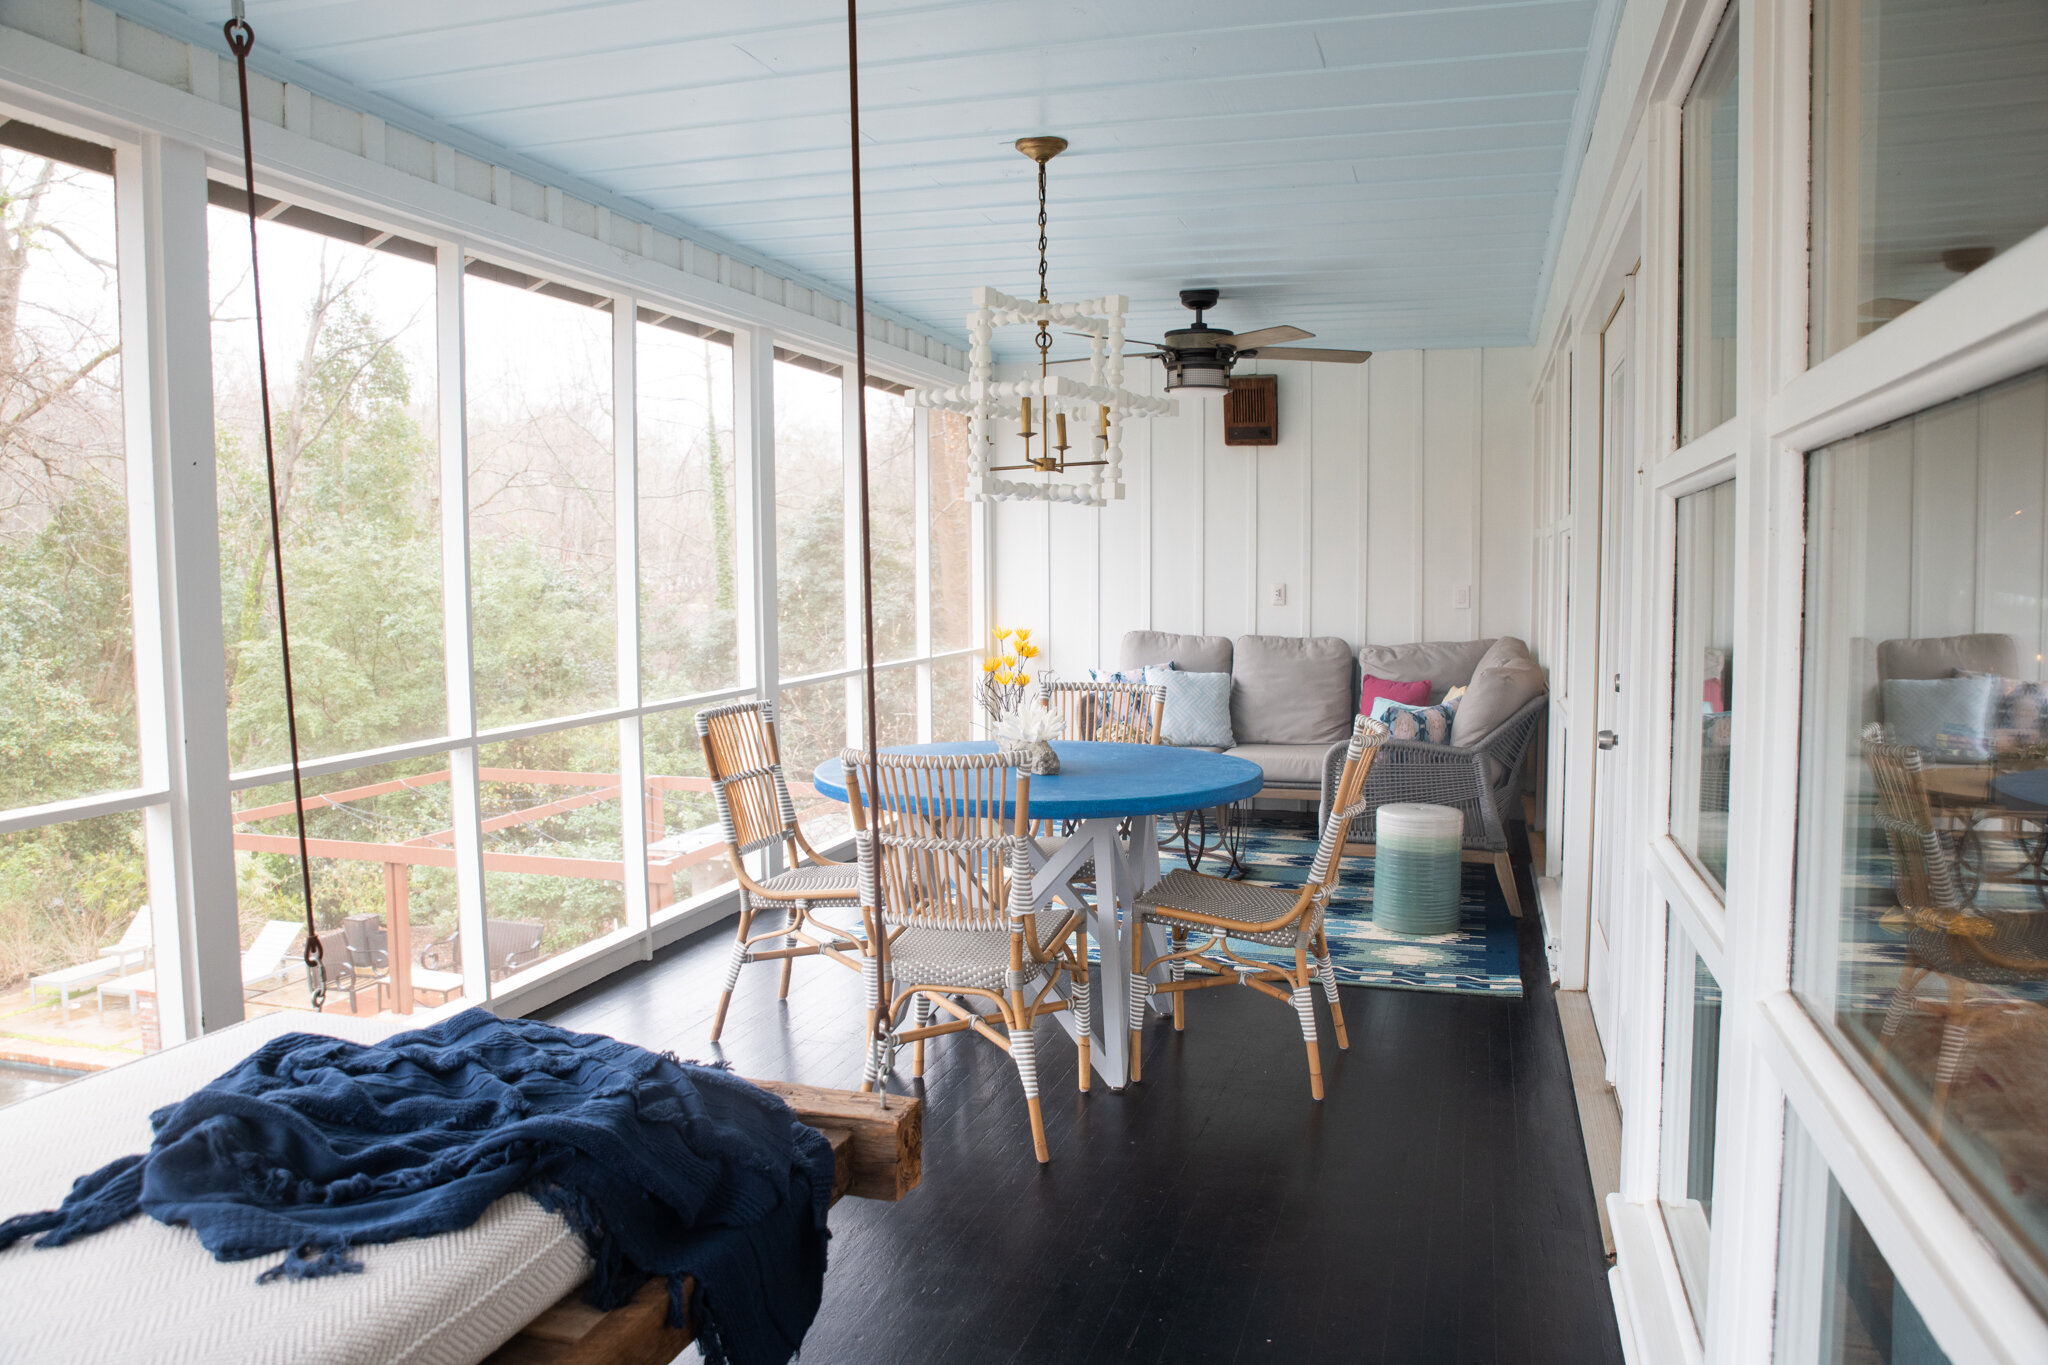 Dwell-Chic-Colorful-Coastal-Porch-Lounge-Swing-And-Table.jpg